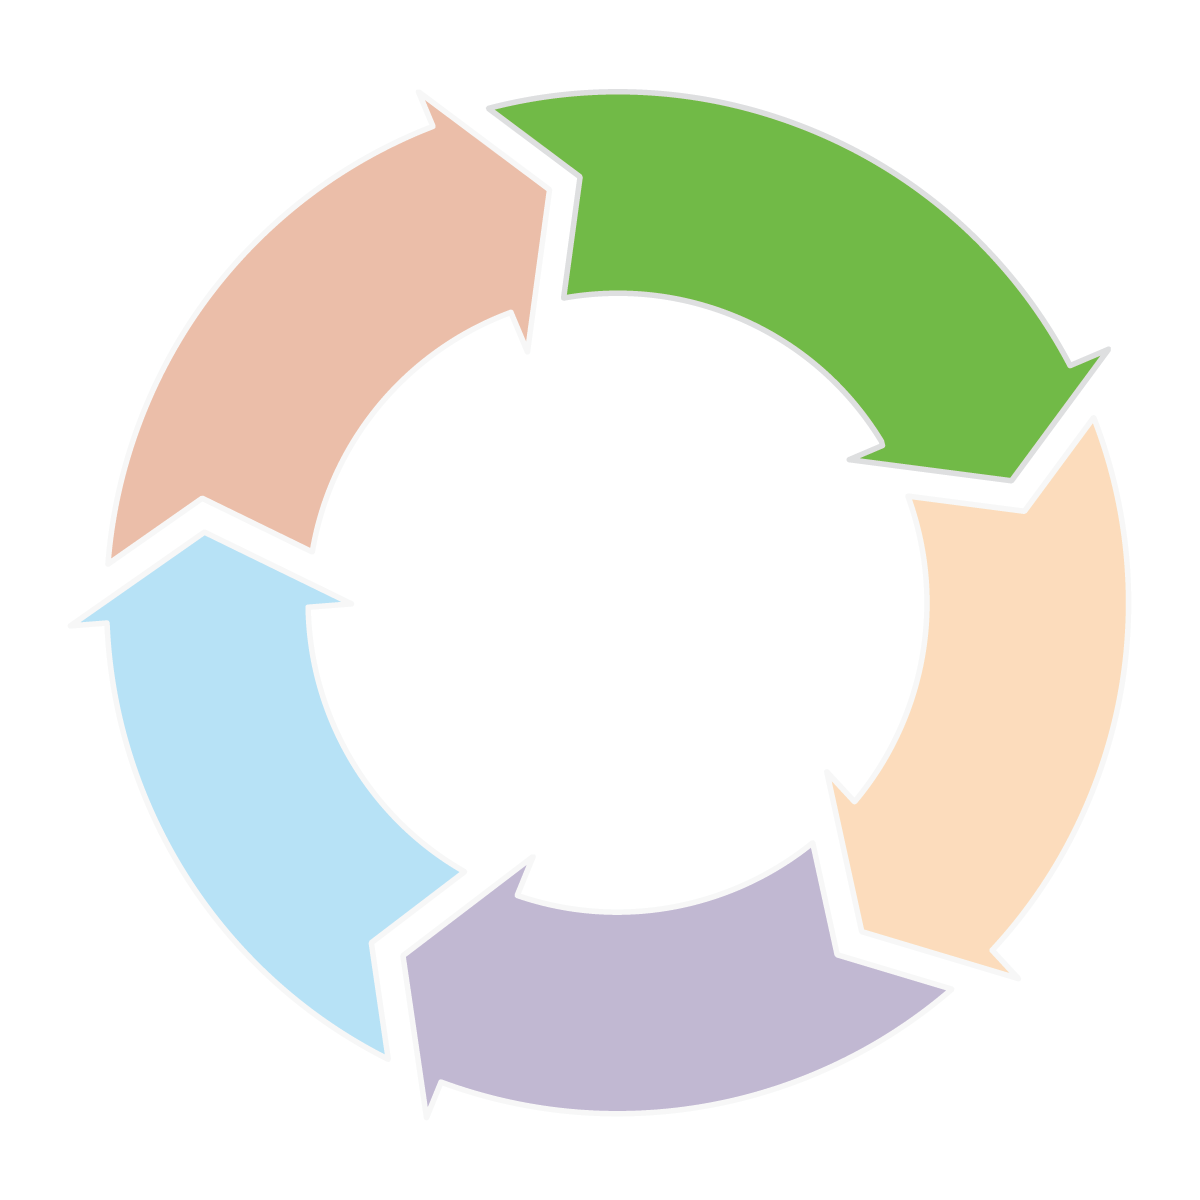 Theory of change memphis. Circle clipart student